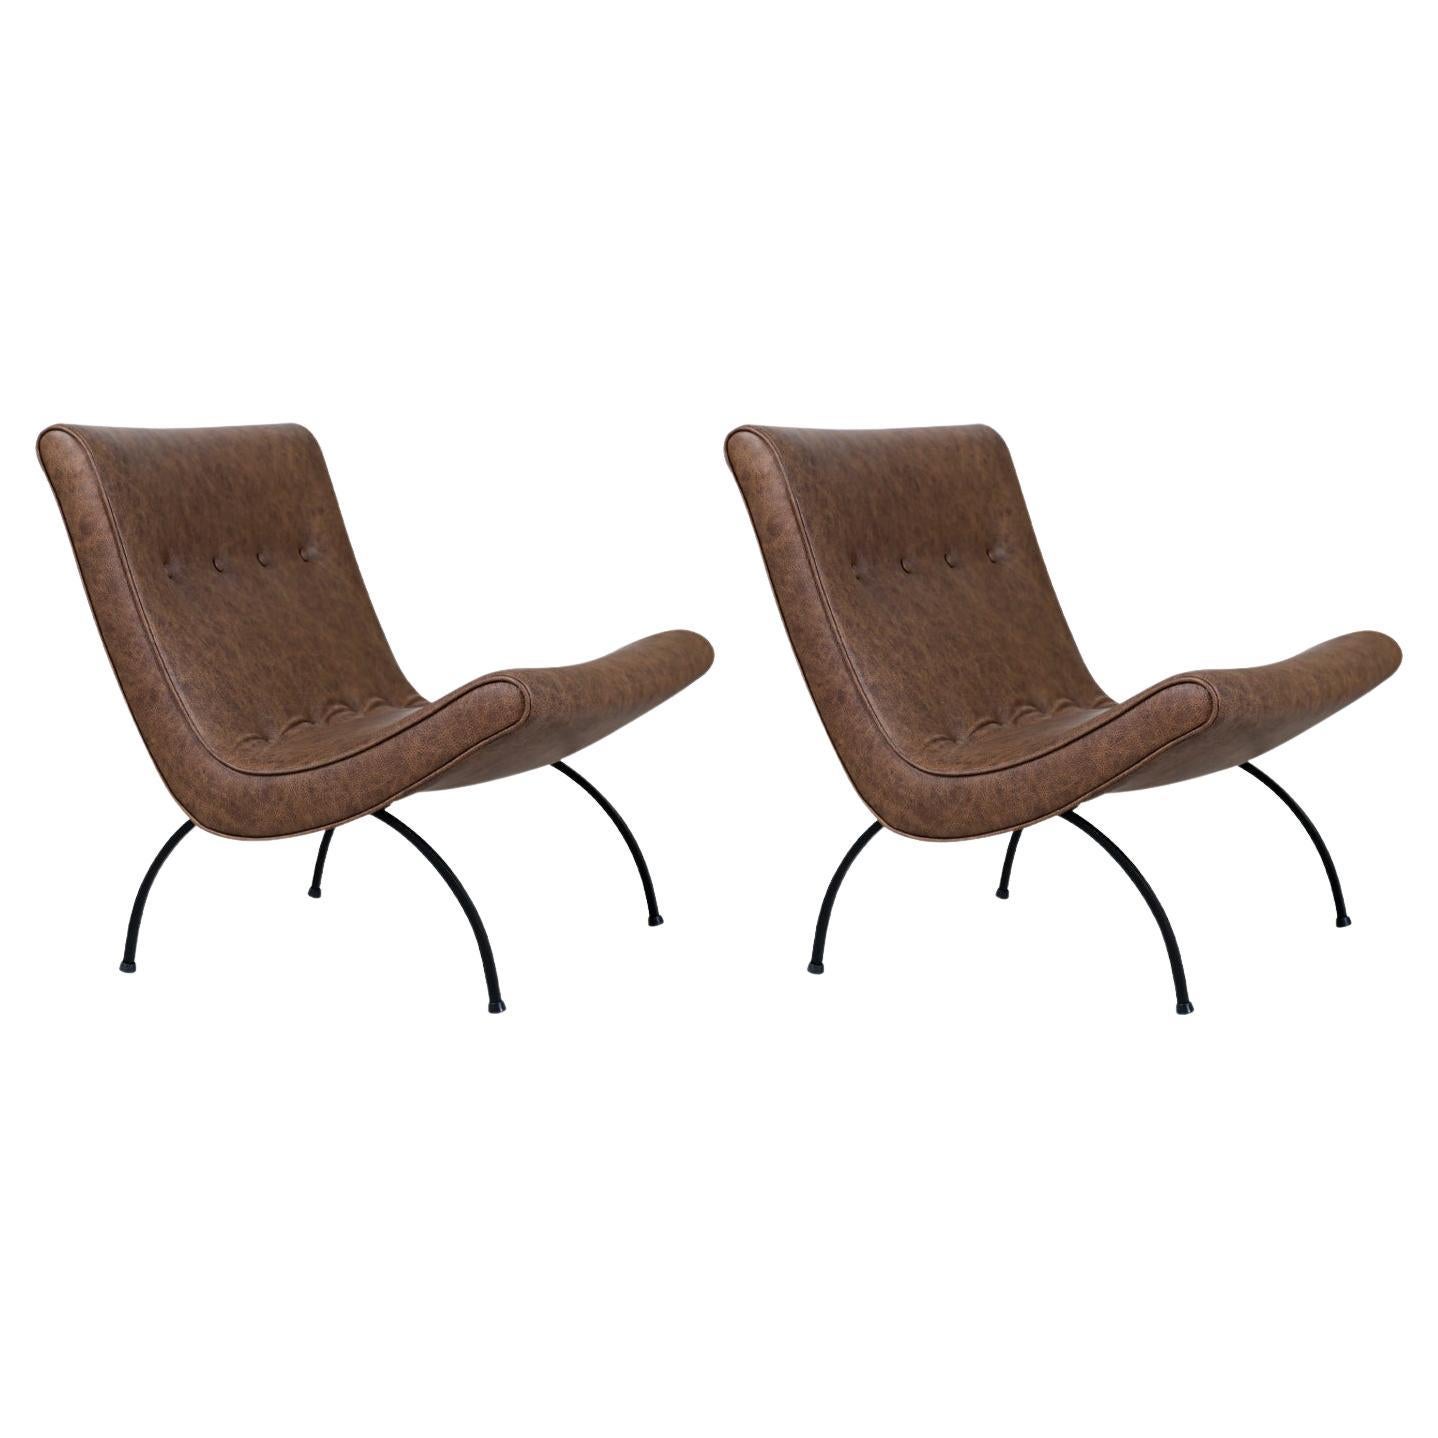 Milo Baughman "Scoop" Iron & Leather Lounge Chairs for Thayer Coggin